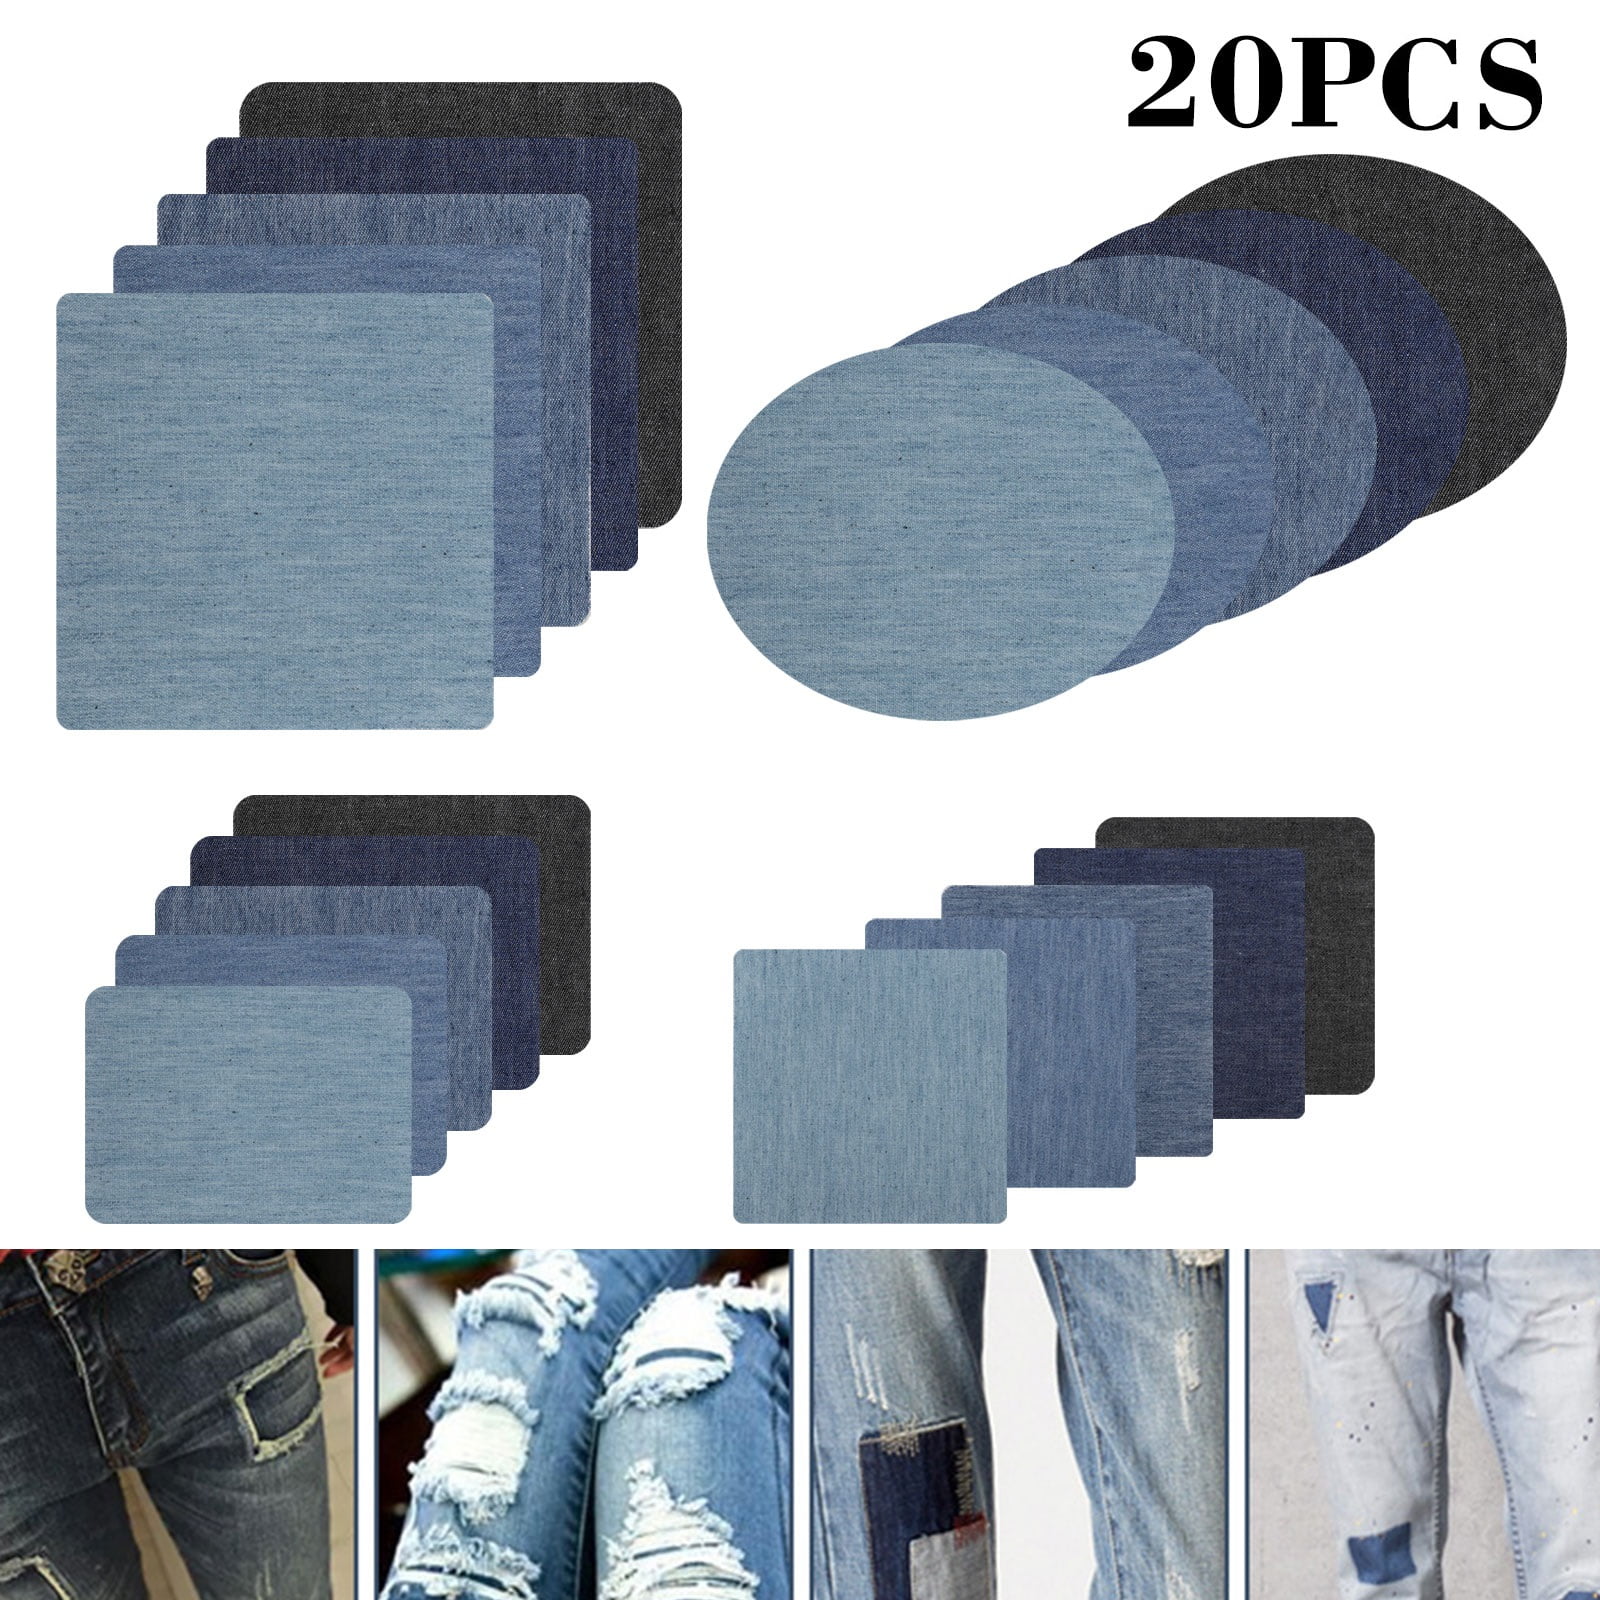 Jean Patches，Blue Denim Iron On Patches for Jeans Clothing Hole Repairing and Decoration Inside and Outside Iron On Patches Blue Jeans Denim Patches 4 Rolls 